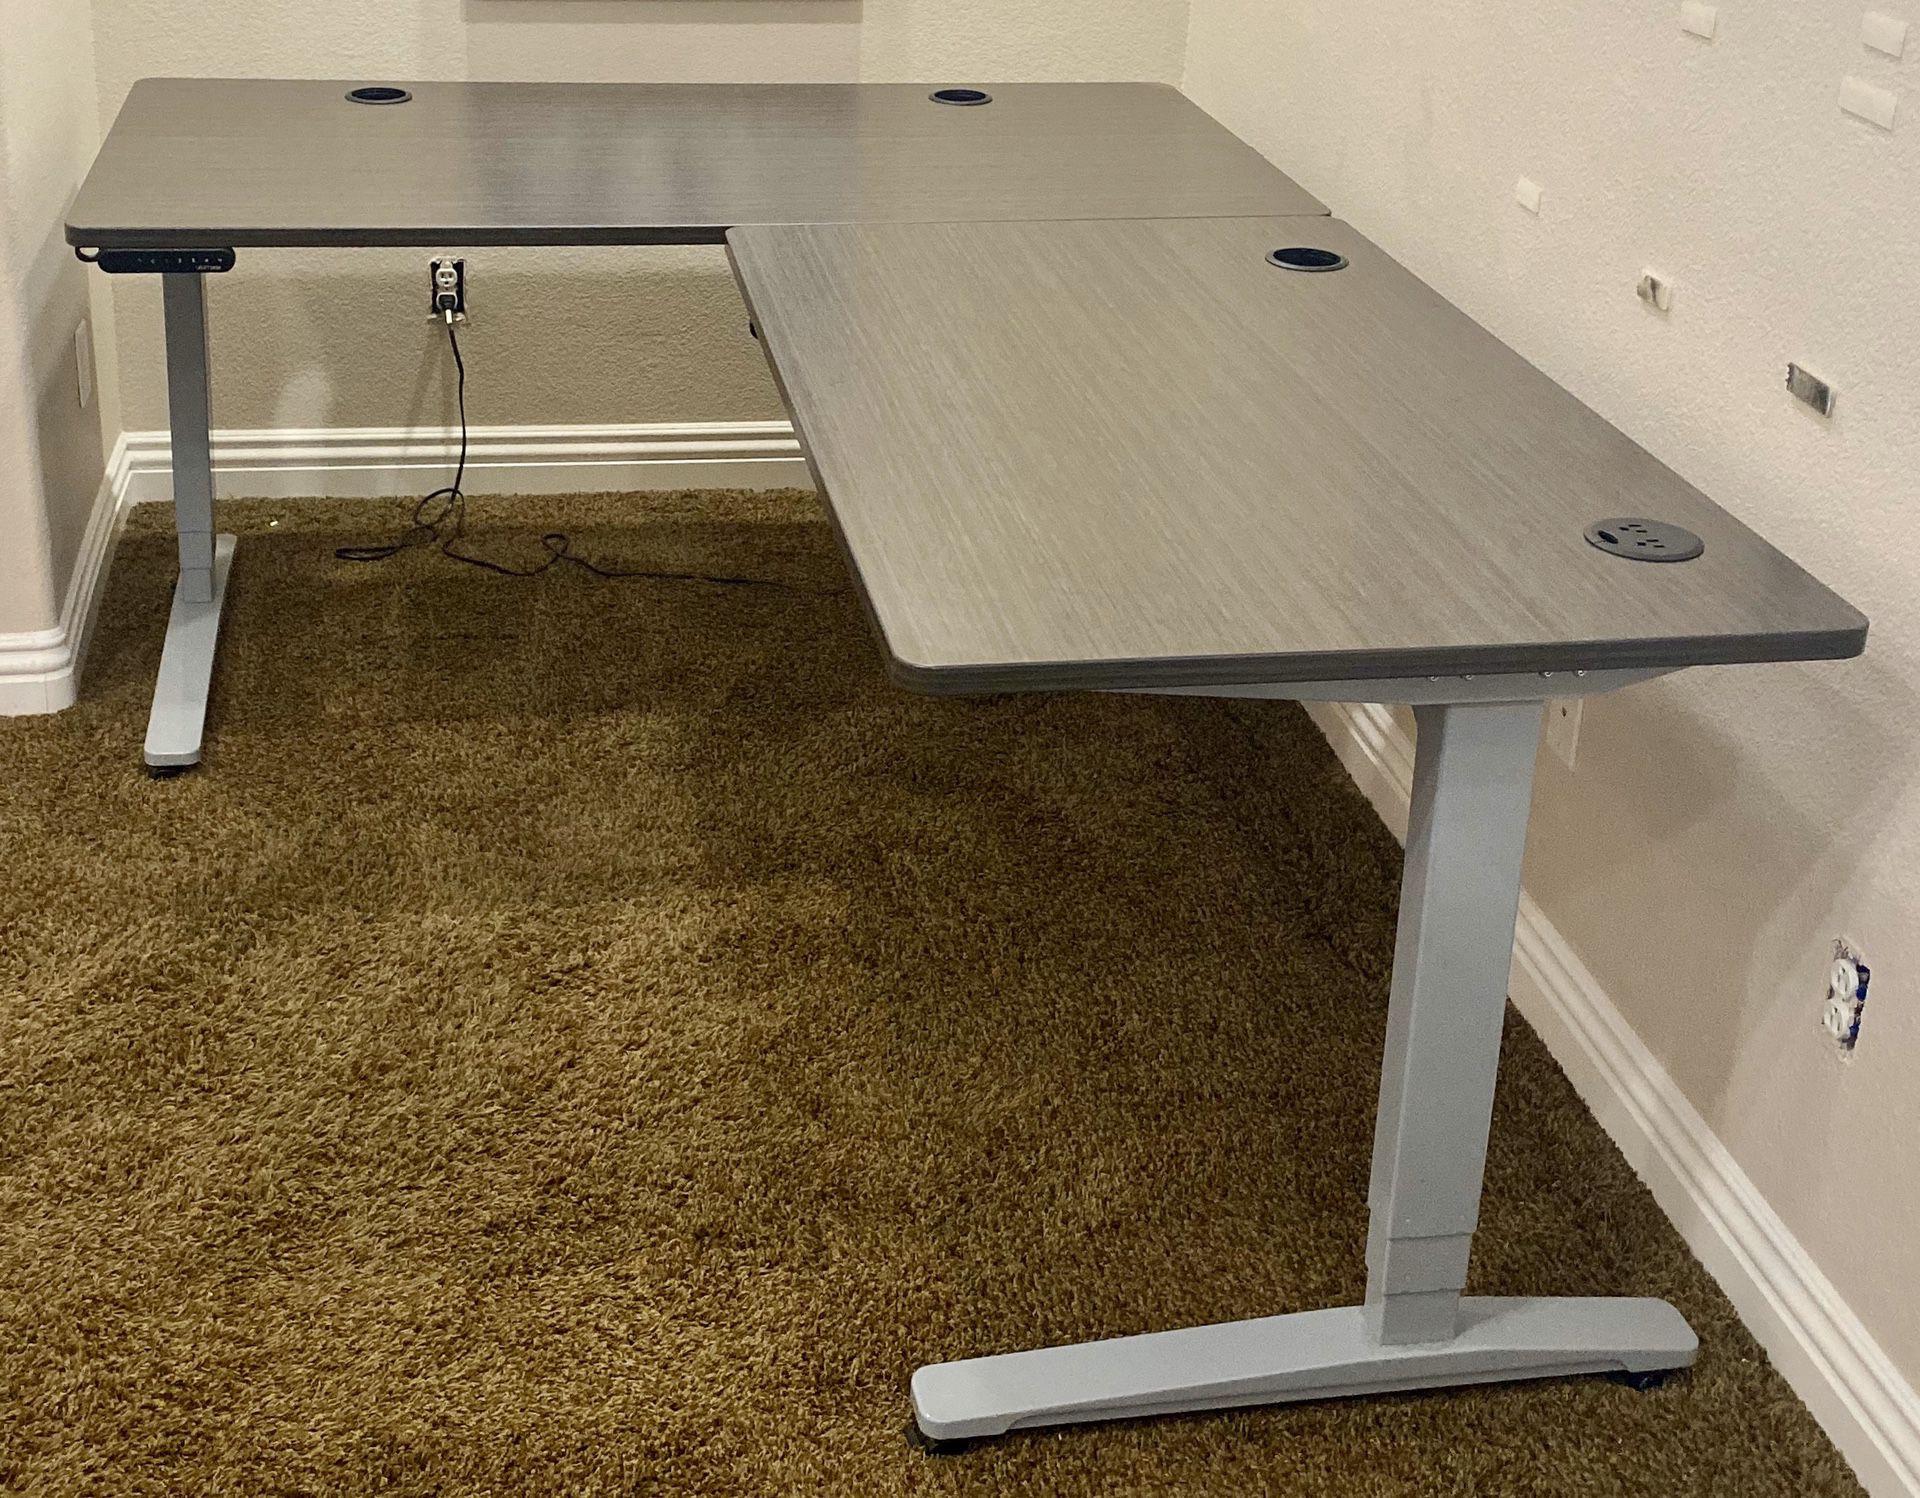 UPLIFT Height Adjustable Standing L-Shaped Computer Desk *Great Condition*